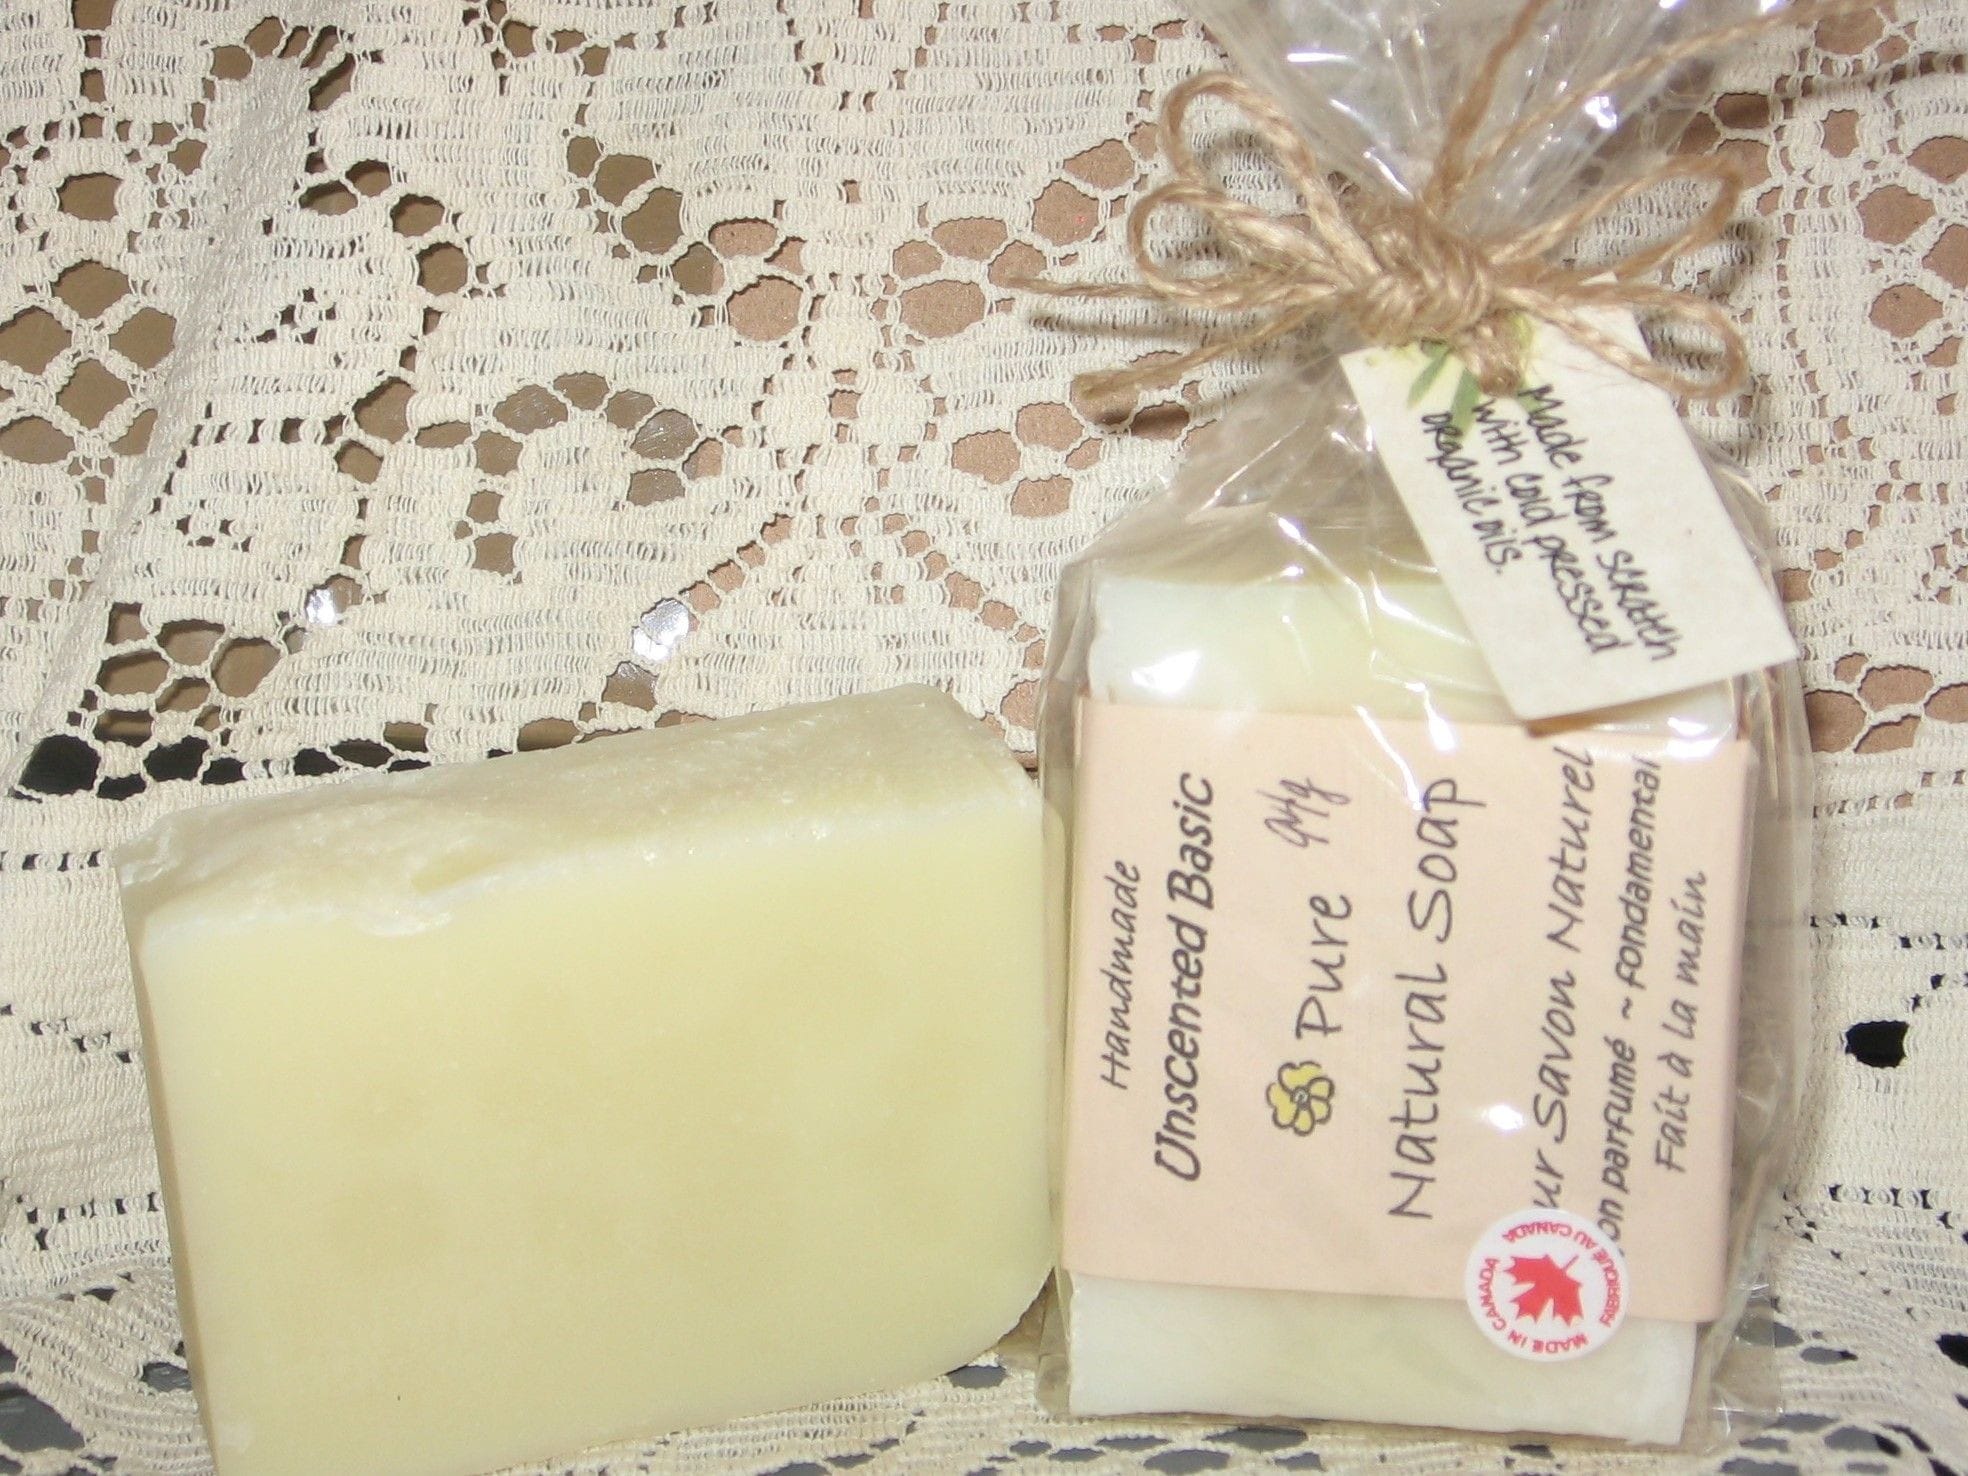 This basic pure natural soap is made with care from cold pressed organic emollient rich vegetable oils  A nice bubbly family bar, long lasting, vegan.